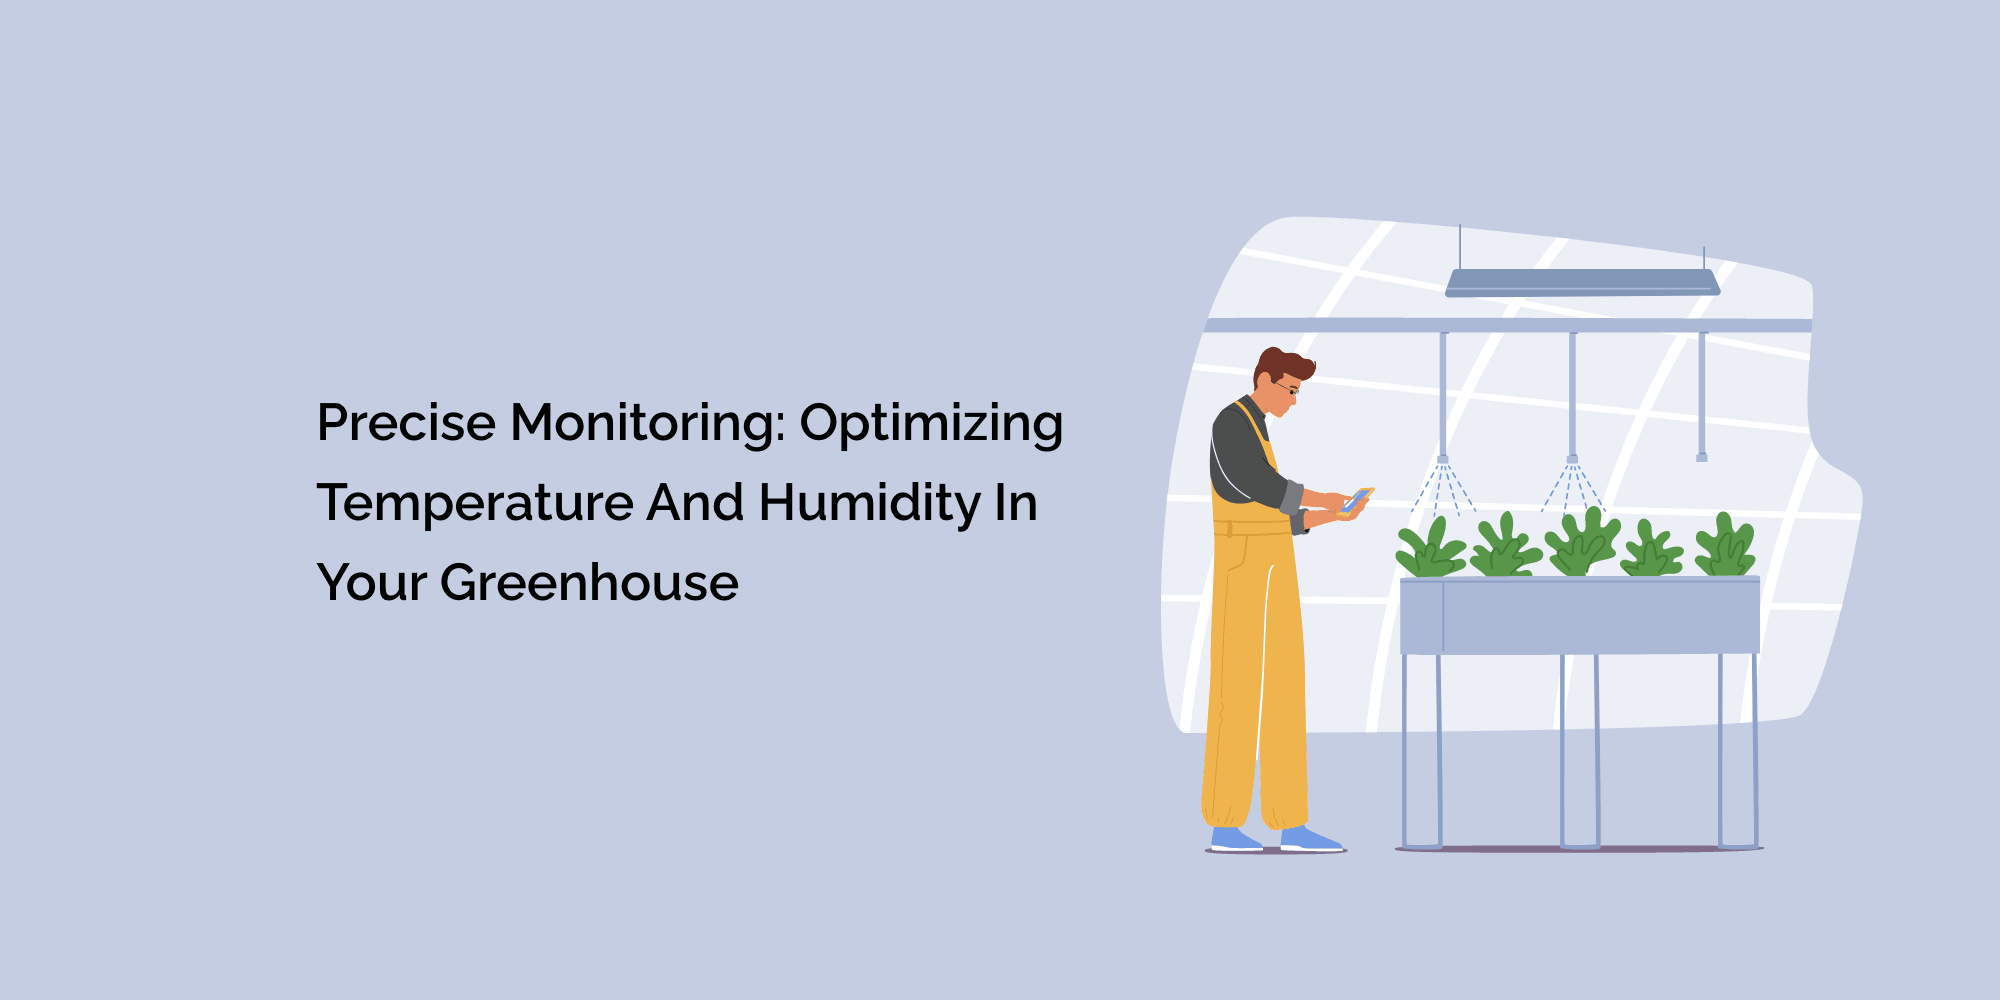 Precise Monitoring: Optimizing Temperature and Humidity in Your Greenhouse